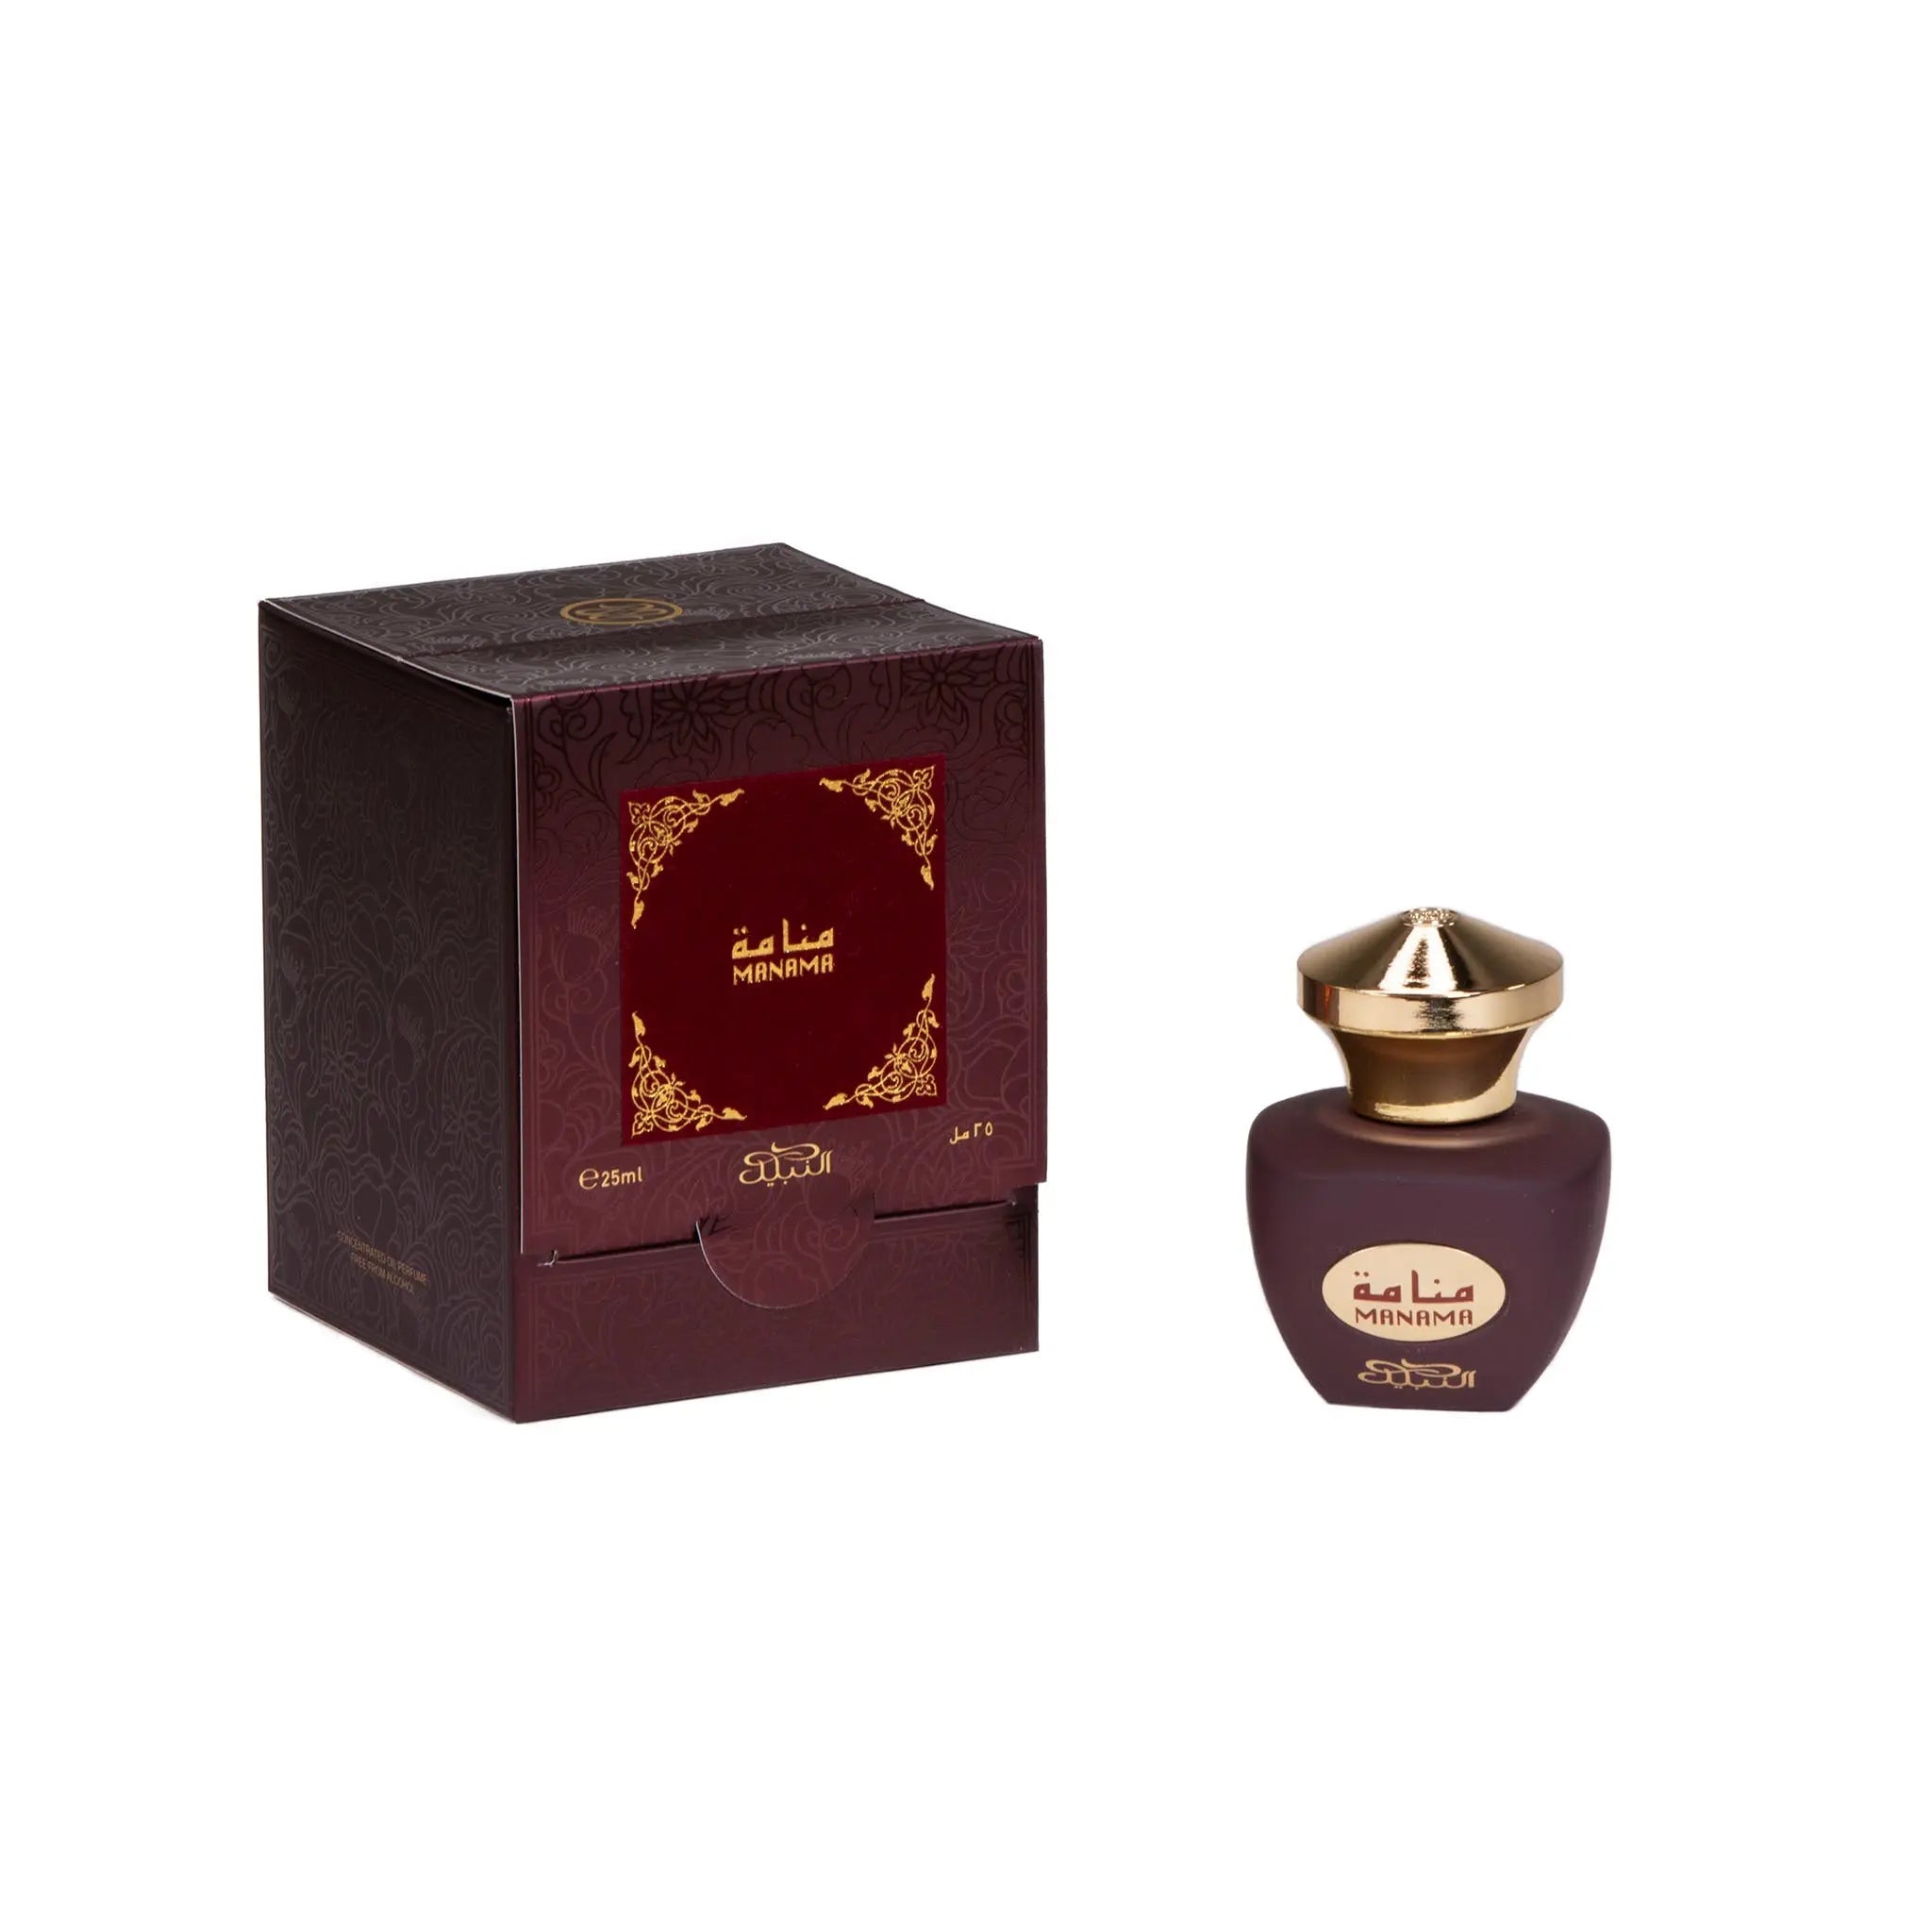 The image features a perfume product named "MANAMA" from Nabeel Perfumes. It shows a dark brown perfume bottle with a golden cap and the name "MANAMA" in both Arabic and English script on the label. Next to the bottle is the packaging box which matches in color and has a similar name label, framed by an ornate golden pattern. The box also has embossed floral patterns and indicates a volume of "25ml."